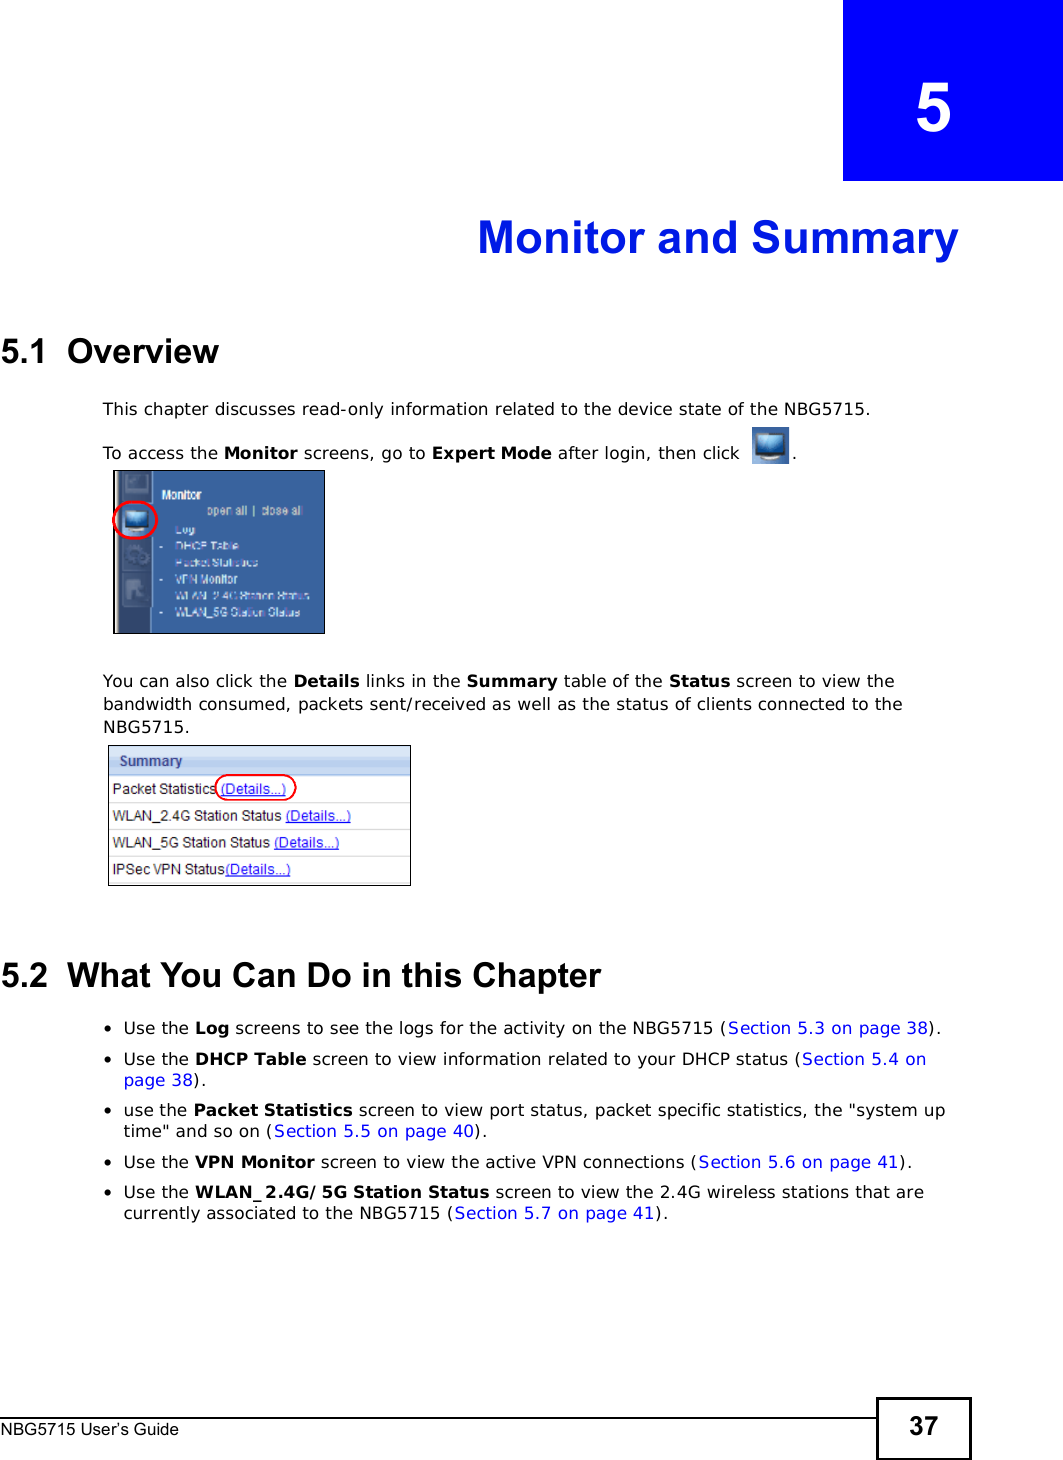 NBG5715 User’s Guide 37CHAPTER   5Monitor and Summary5.1  OverviewThis chapter discusses read-only information related to the device state of the NBG5715. To access the Monitor screens, go to Expert Mode after login, then click .You can also click the Details links in the Summary table of the Status screen to view the bandwidth consumed, packets sent/received as well as the status of clients connected to the NBG5715.5.2  What You Can Do in this Chapter•Use the Log screens to see the logs for the activity on the NBG5715 (Section 5.3 on page 38).•Use the DHCP Table screen to view information related to your DHCP status (Section 5.4 on page 38).•use the Packet Statistics screen to view port status, packet specific statistics, the &quot;system up time&quot; and so on (Section 5.5 on page 40).•Use the VPN Monitor screen to view the active VPN connections (Section 5.6 on page 41).•Use the WLAN_2.4G/5G Station Status screen to view the 2.4G wireless stations that are currently associated to the NBG5715 (Section 5.7 on page 41).